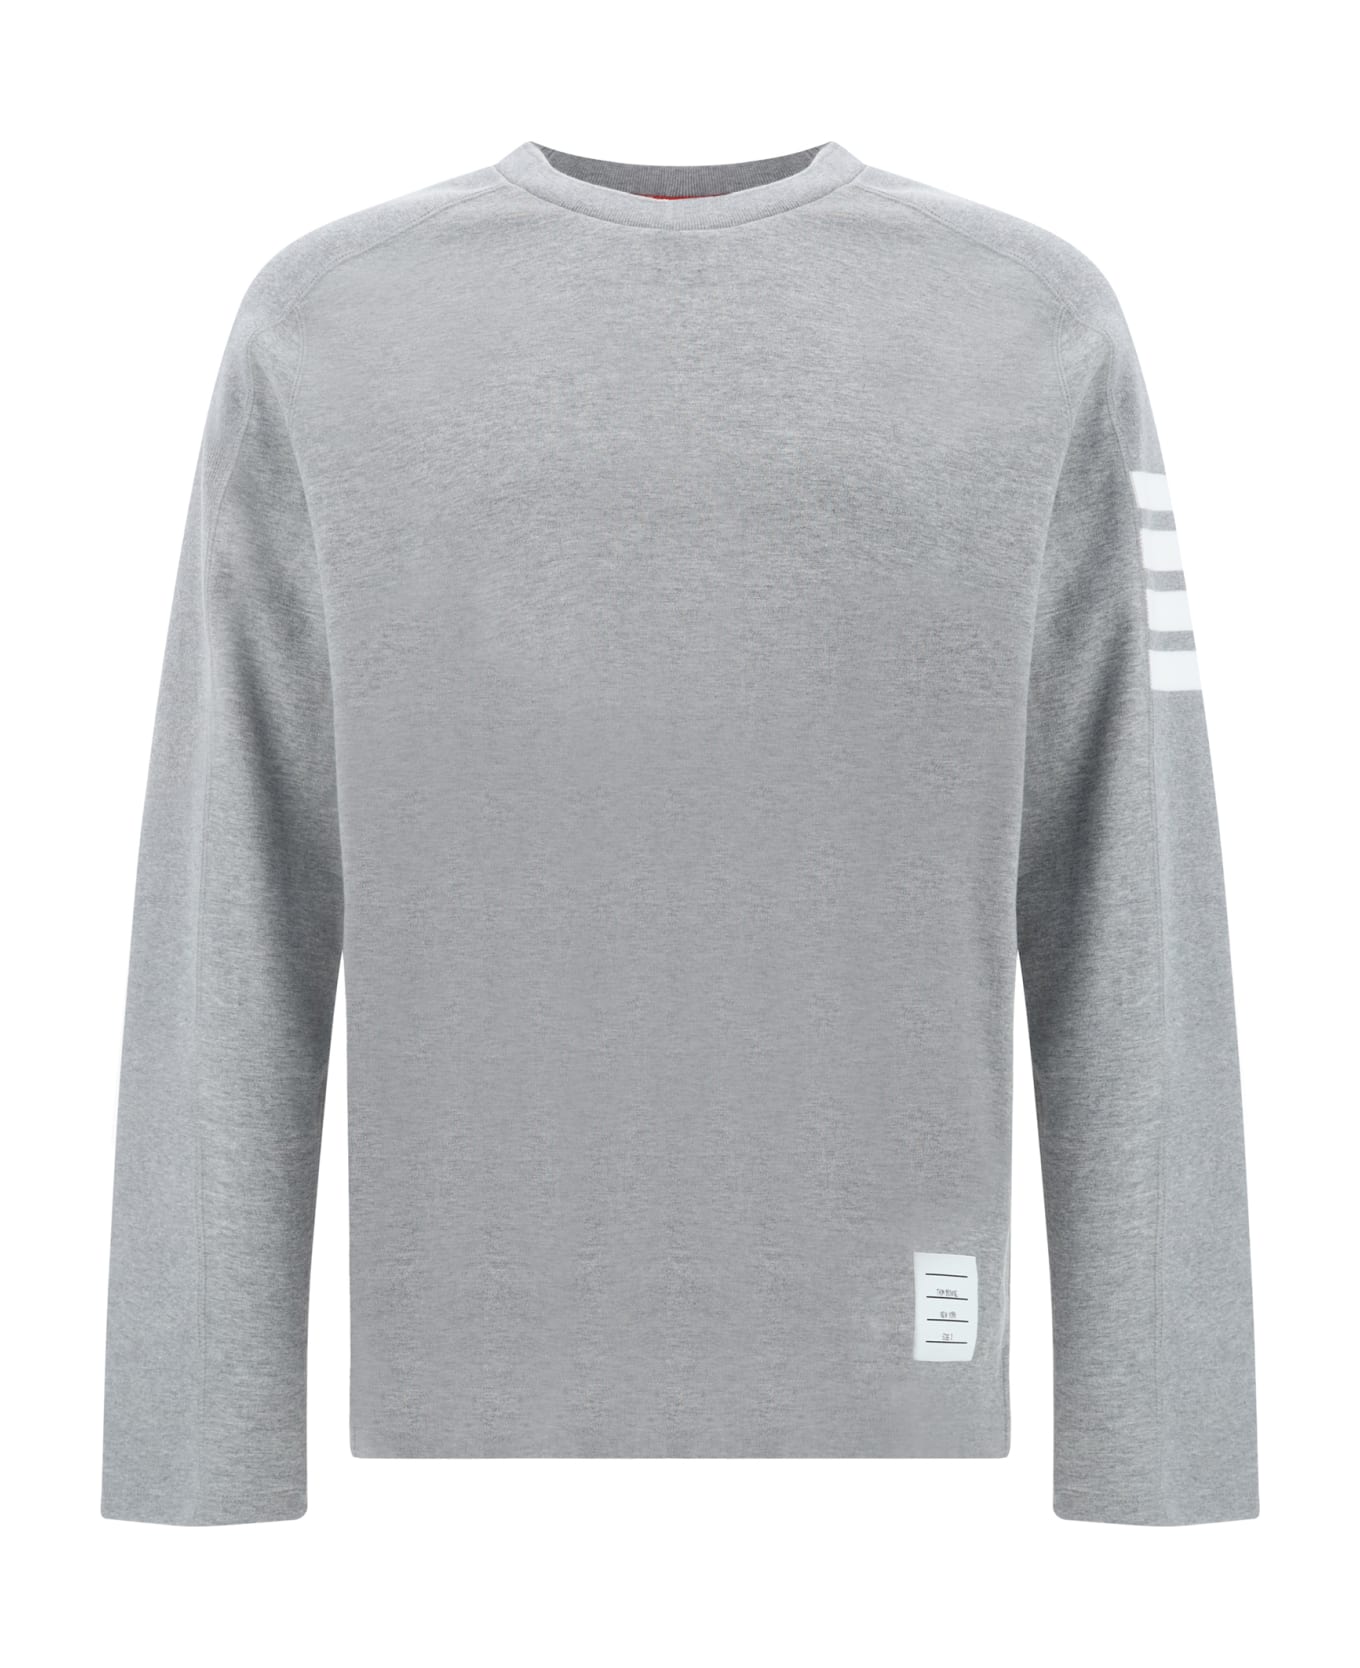 Thom Browne Long Sleeve Jersey